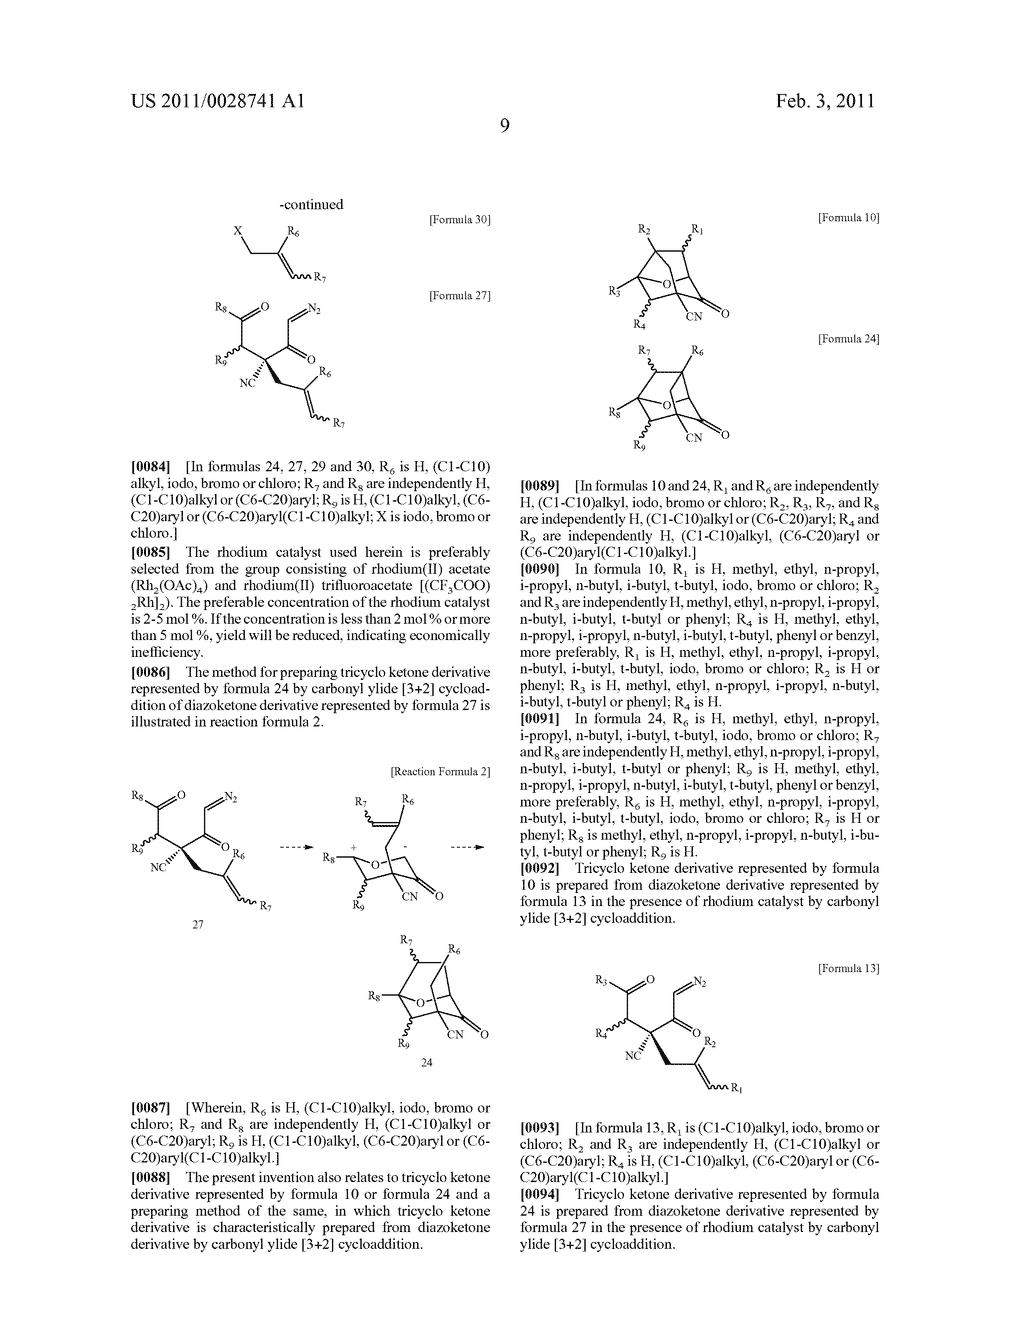 Novel Platensimycin Derivatives, Their Intermediates, and Process for Preparing the Same, and New Process for Preparing Platensimycin - diagram, schematic, and image 10